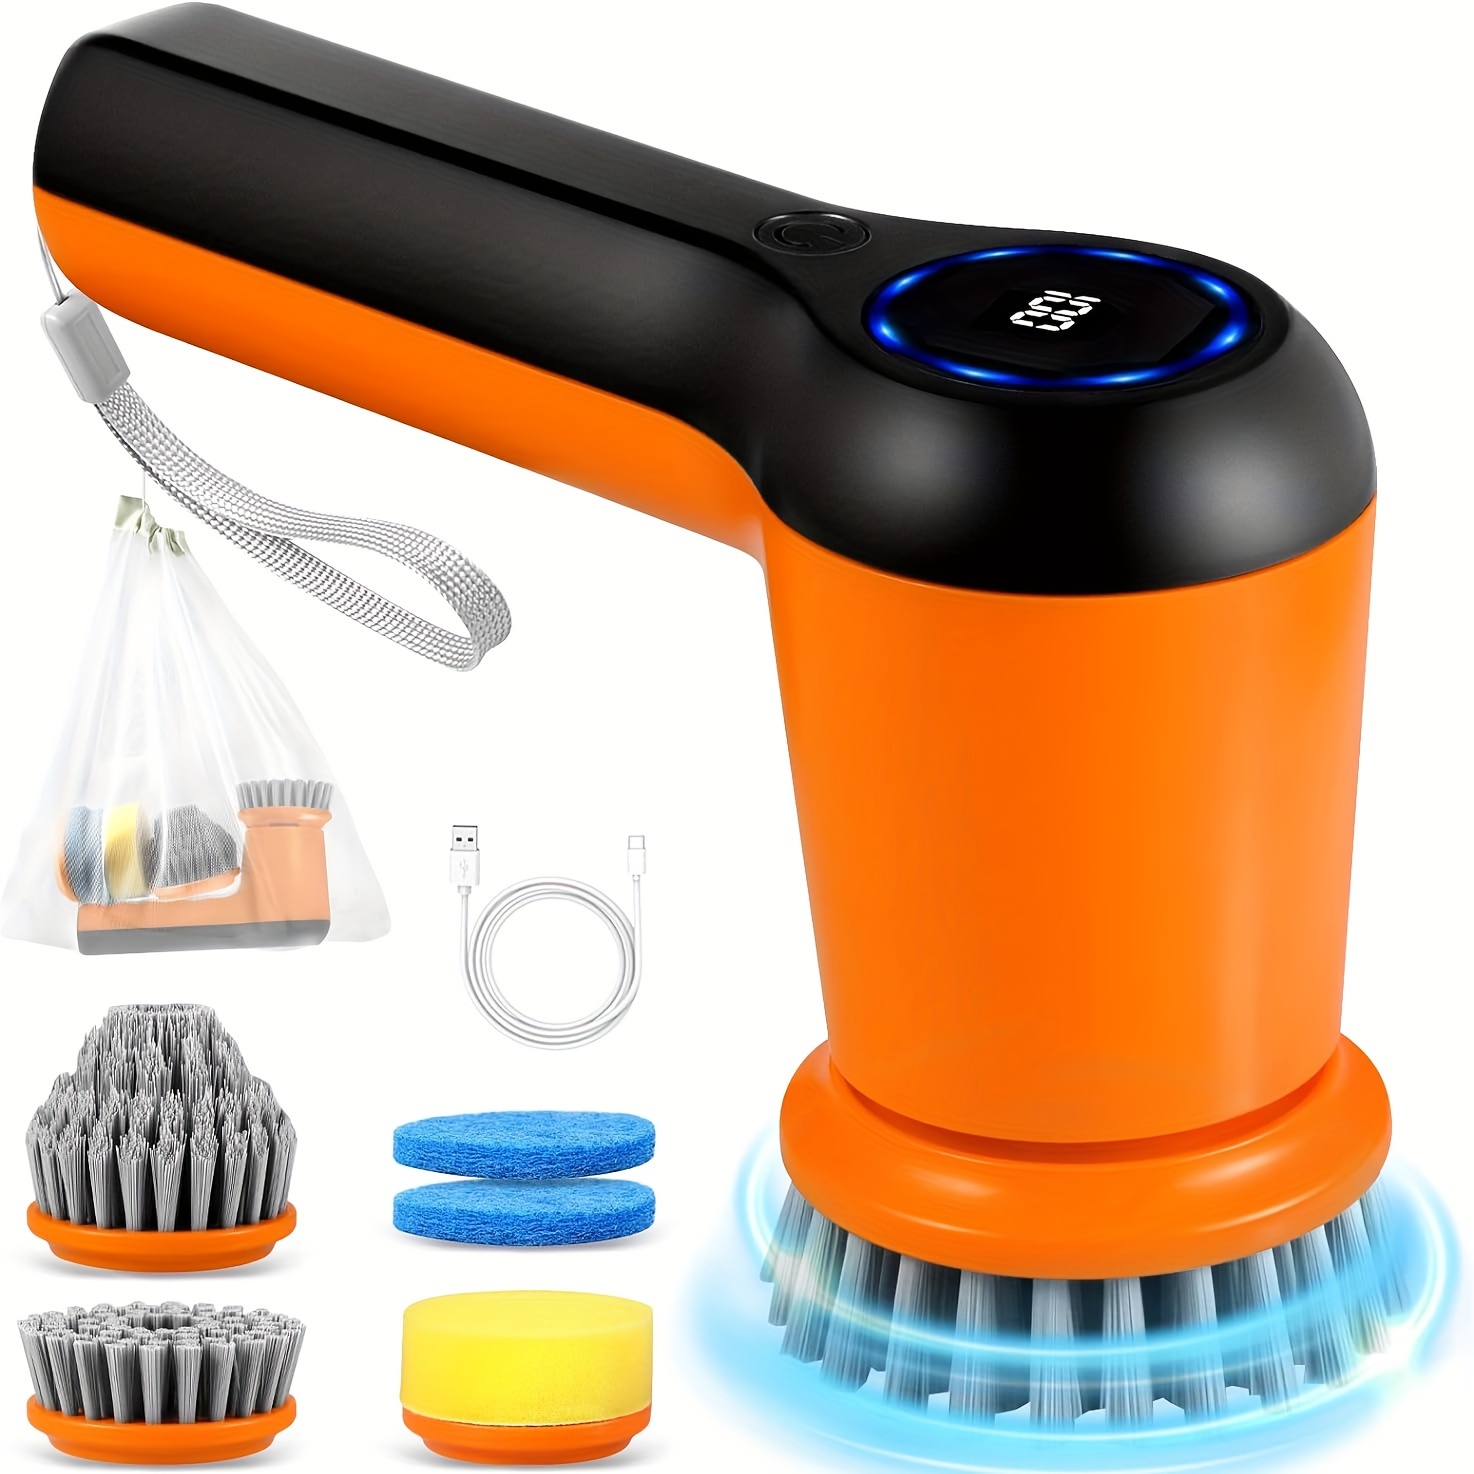 

1 Set, Electric Spin Scrubber, Power Scrubber Cordless Electric Shower Scrubber With Digital Display And 5 Replaceable Heads, 2 Adjustable Speeds, Cleaning Brush For Bathtub, Floor, Tile, Window